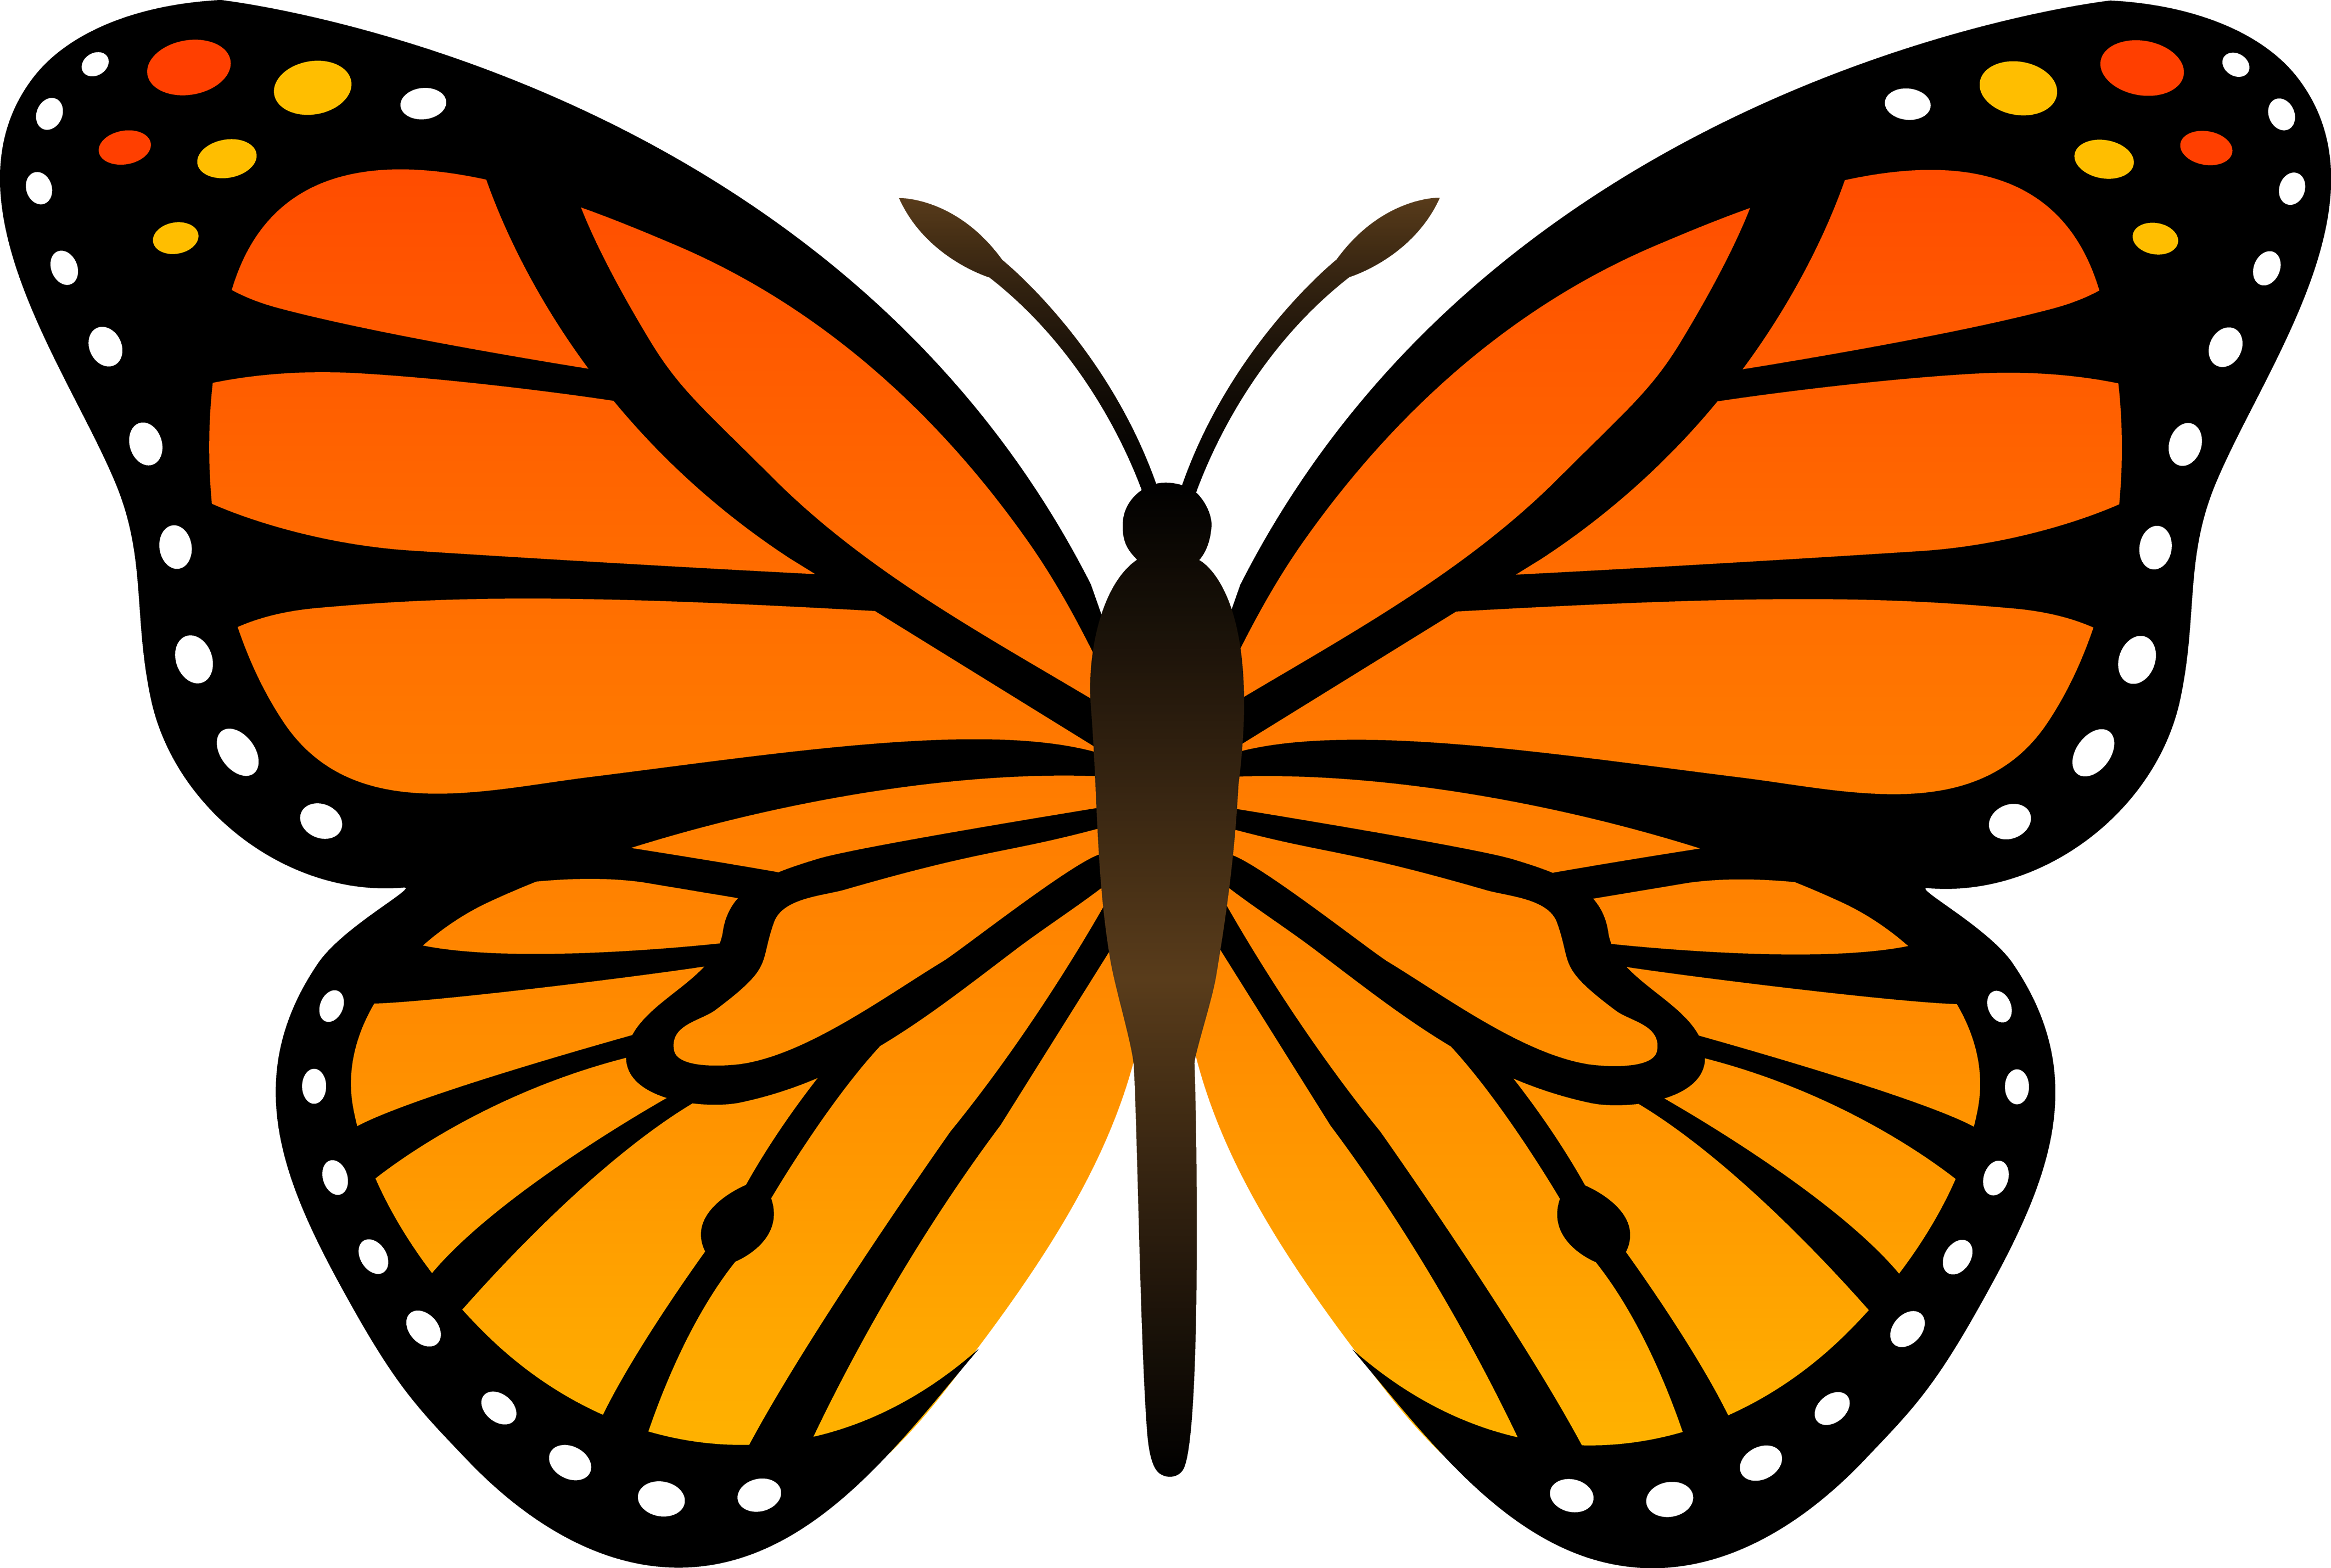 Download PNG image: Orange butterfly PNG image, butterflies free ...